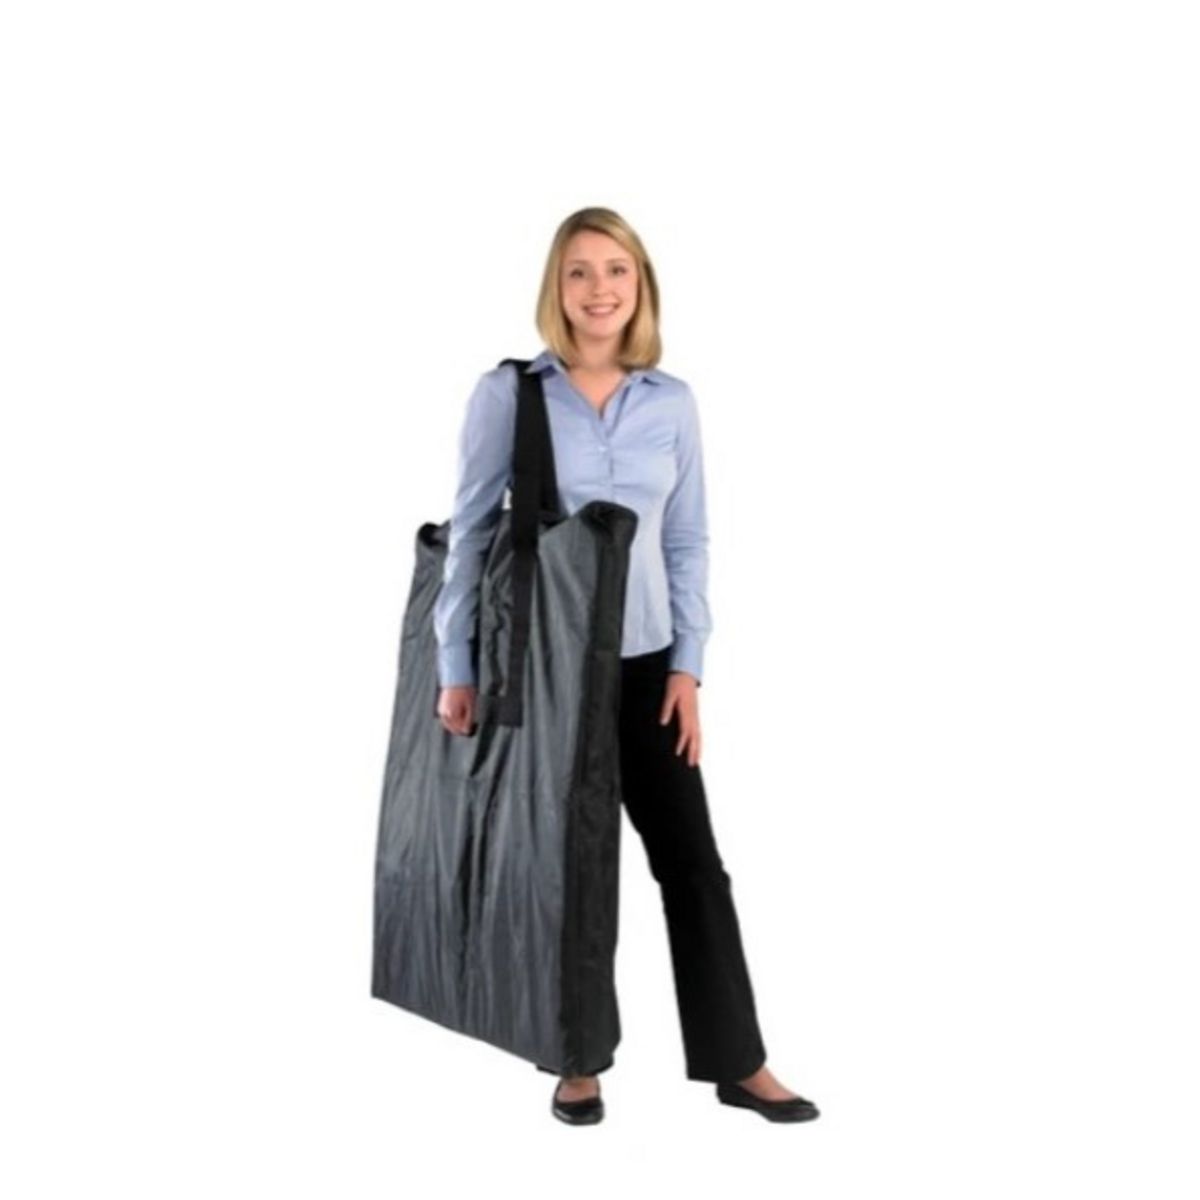 Lady holding carry bag including the Motion promotional display counter parts.jpg